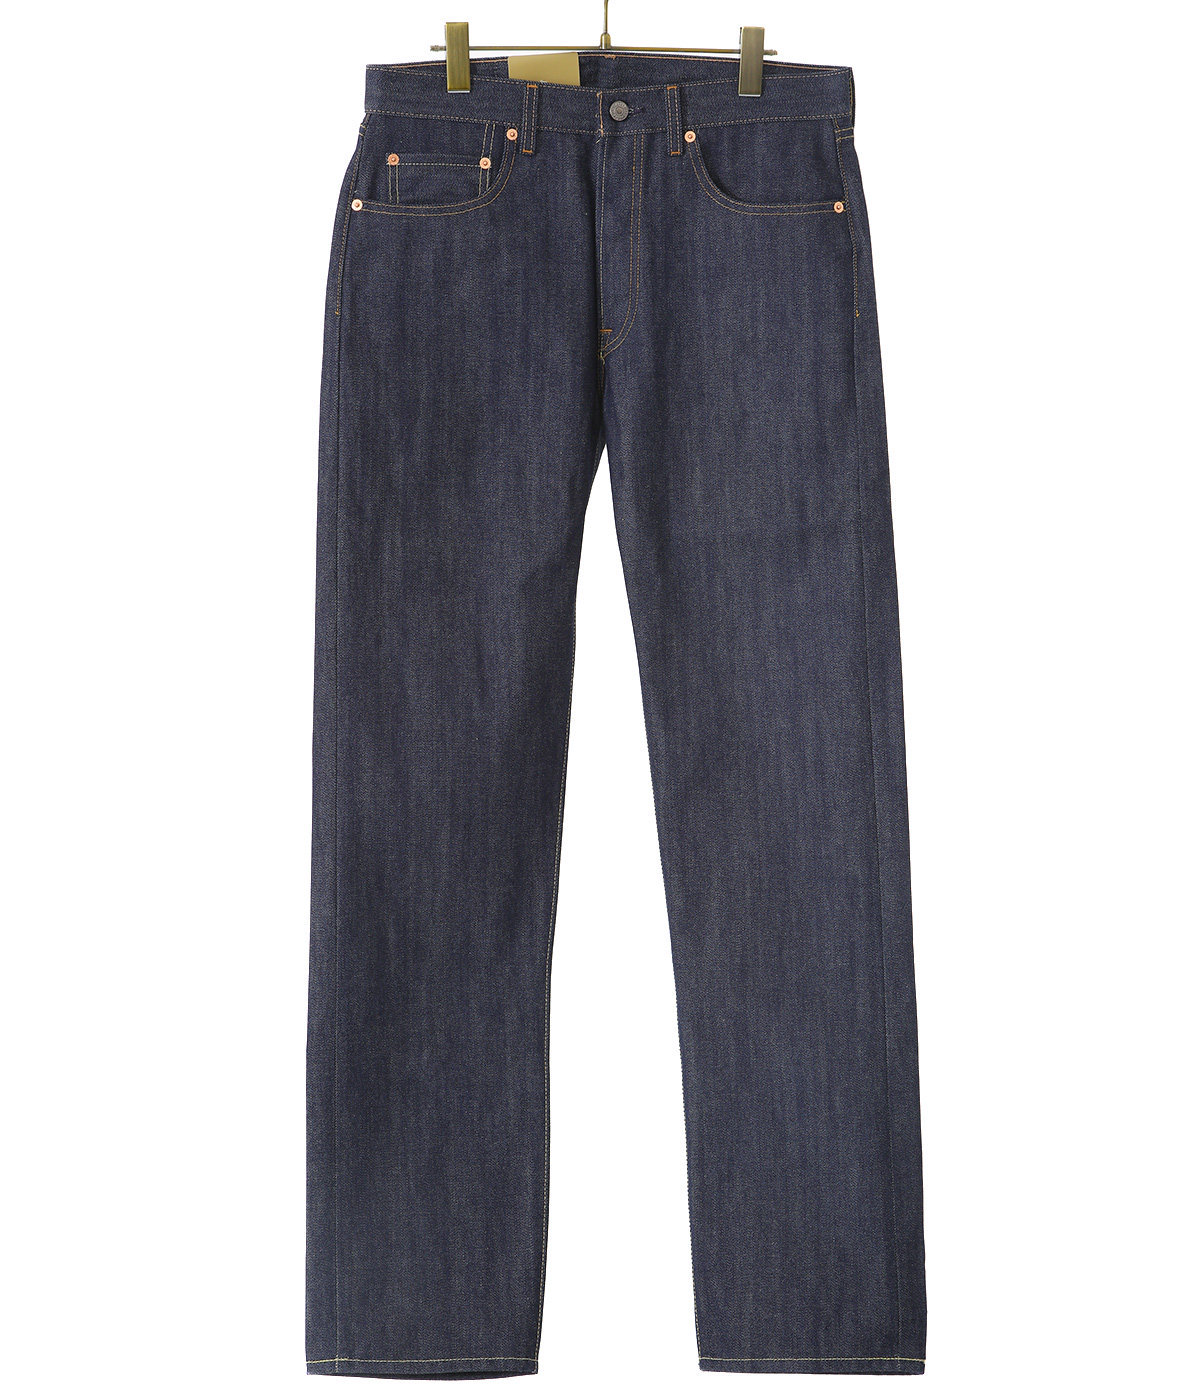 1966 501 JEANS